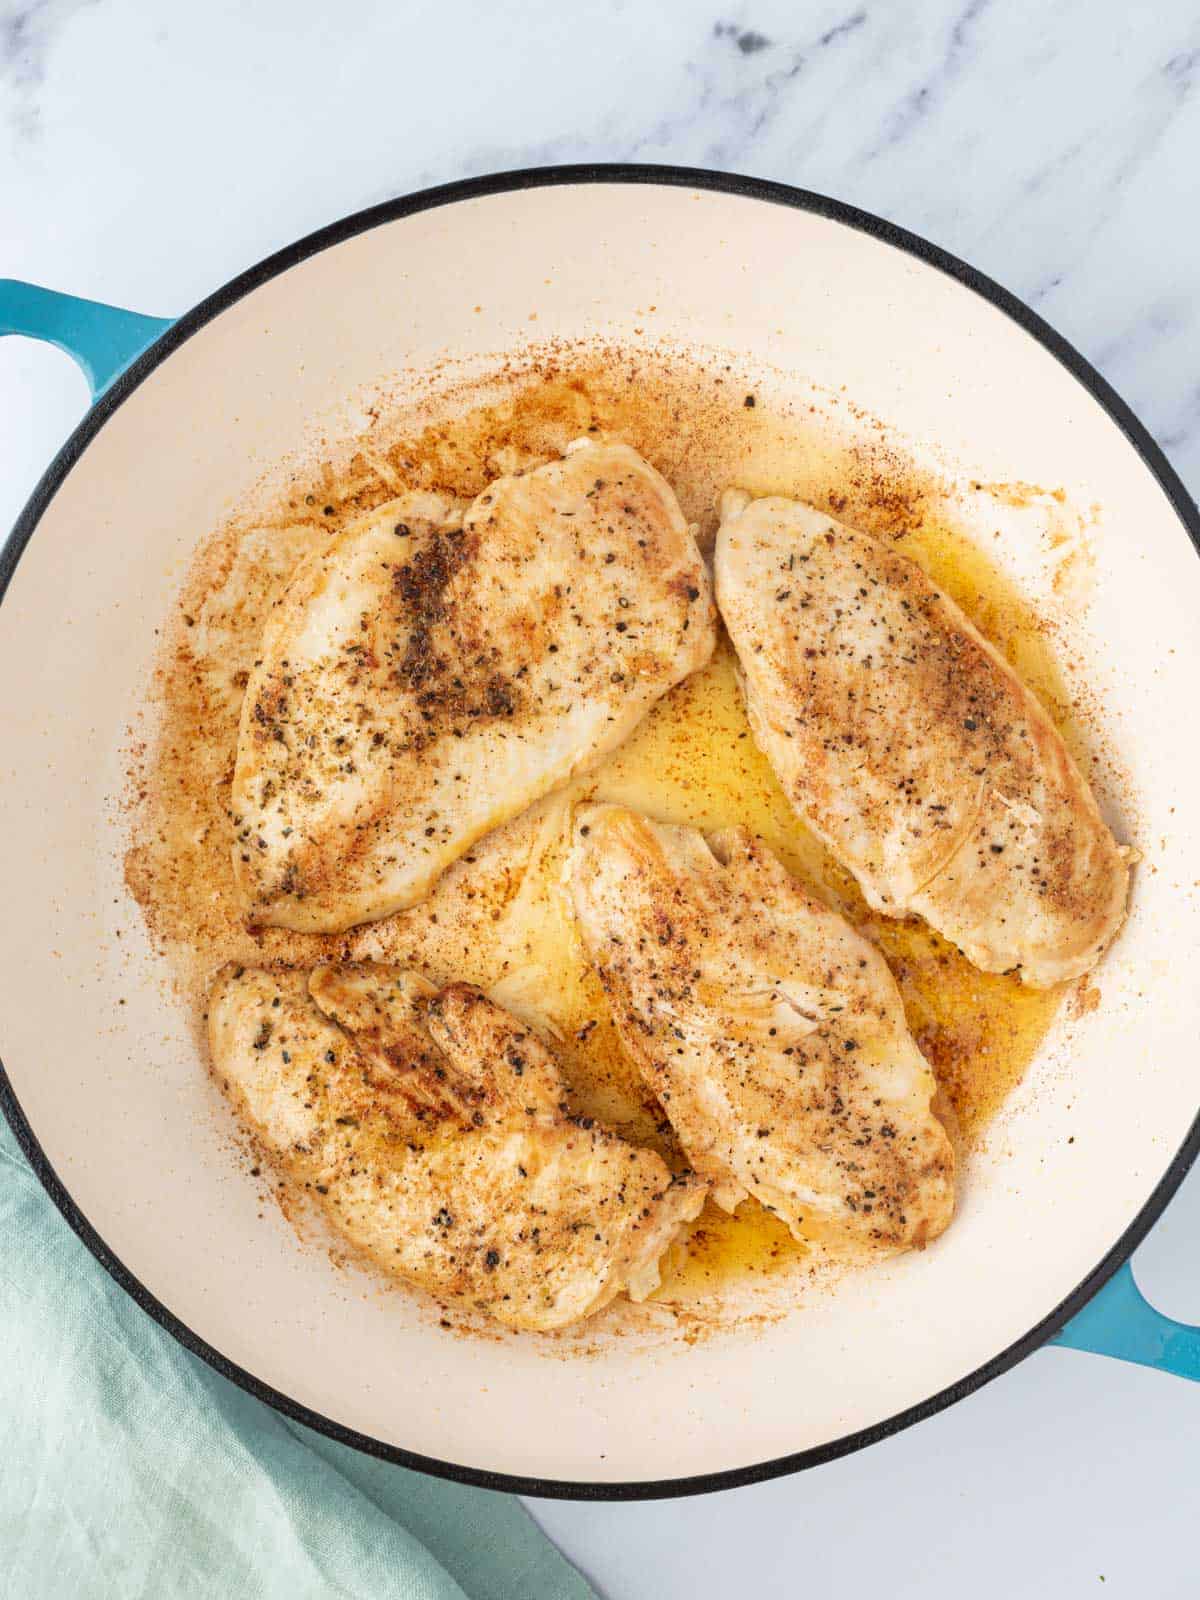 Chicken seared in a pan.